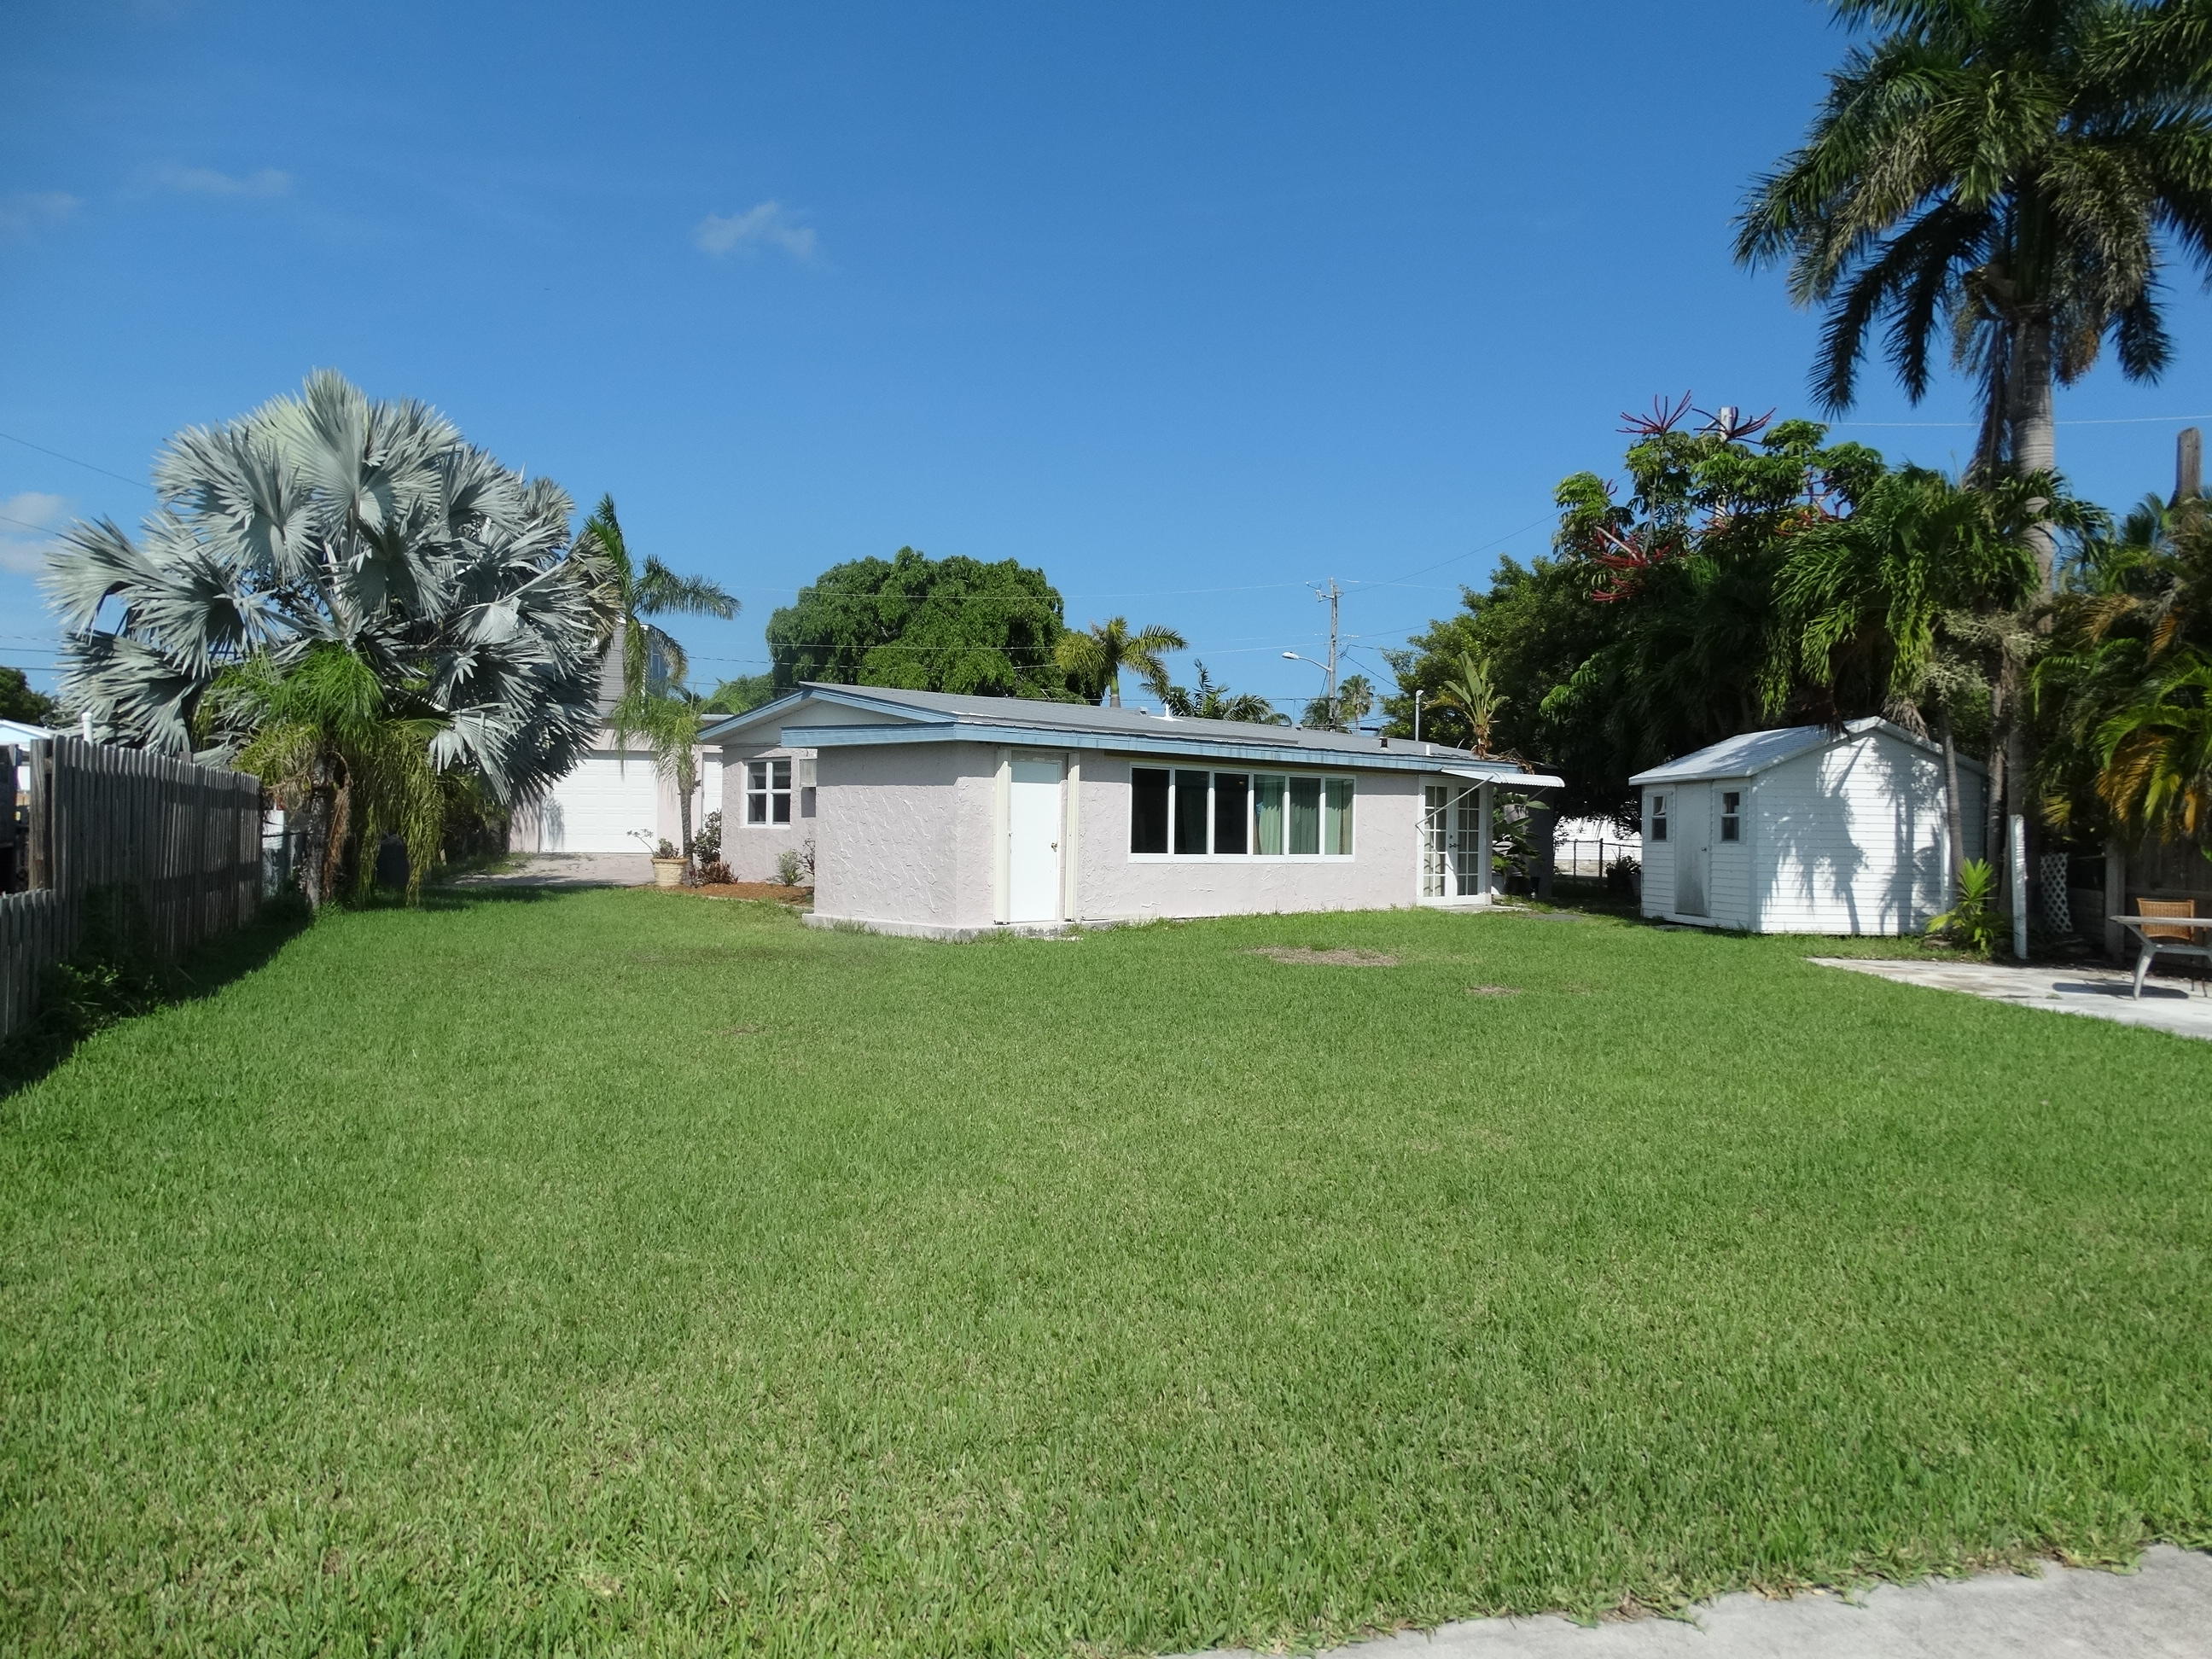 52 Beach Drive, Saddlebunch, Florida, 33040, United States, 2 Bedrooms Bedrooms, ,1 BathroomBathrooms,Residential,For Sale,52 Beach Drive,1219209